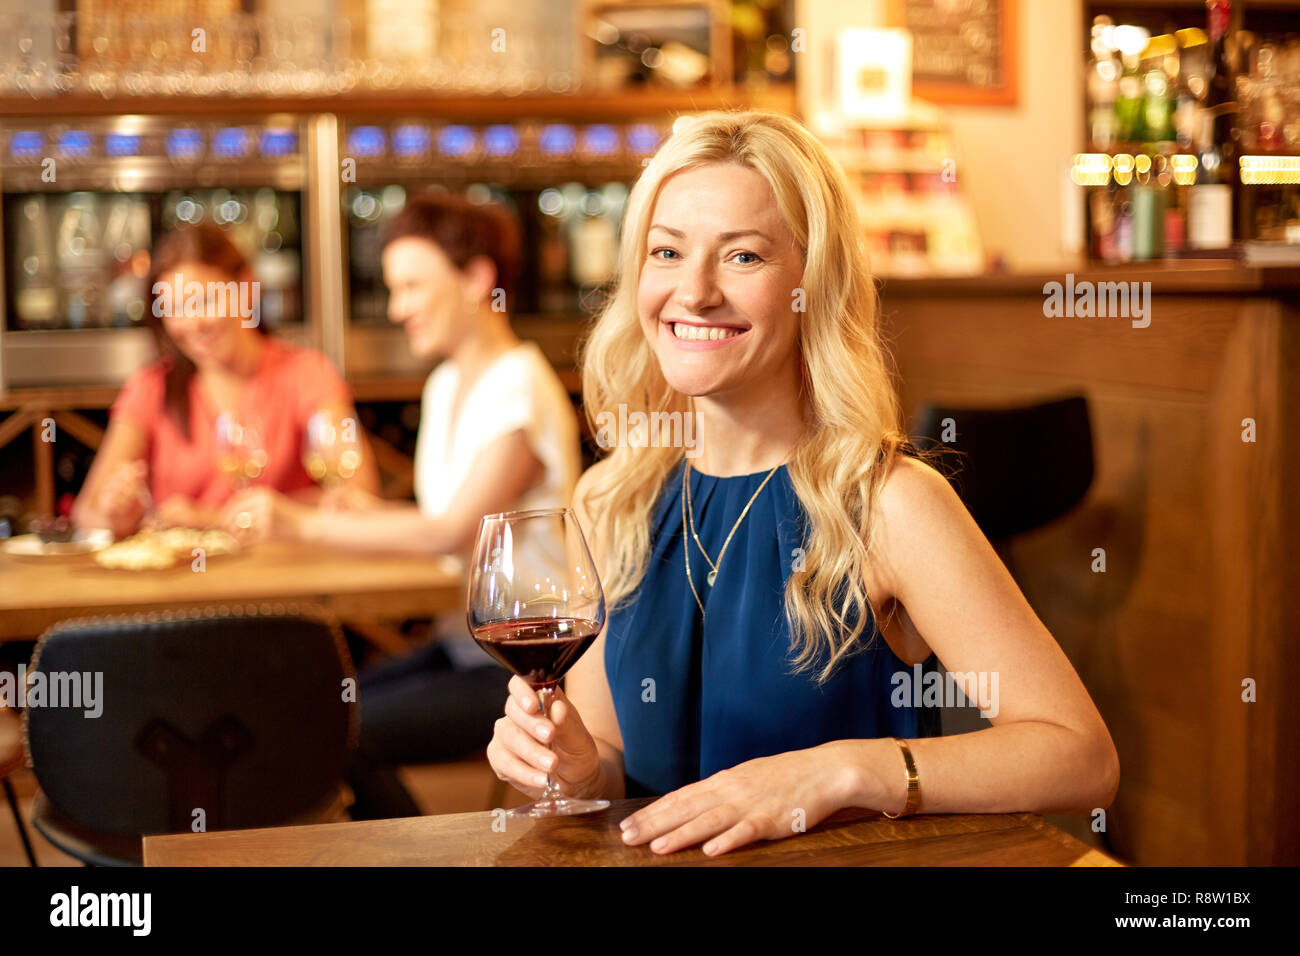 happy woman drinking red wine at bar or restaurant Stock Photo